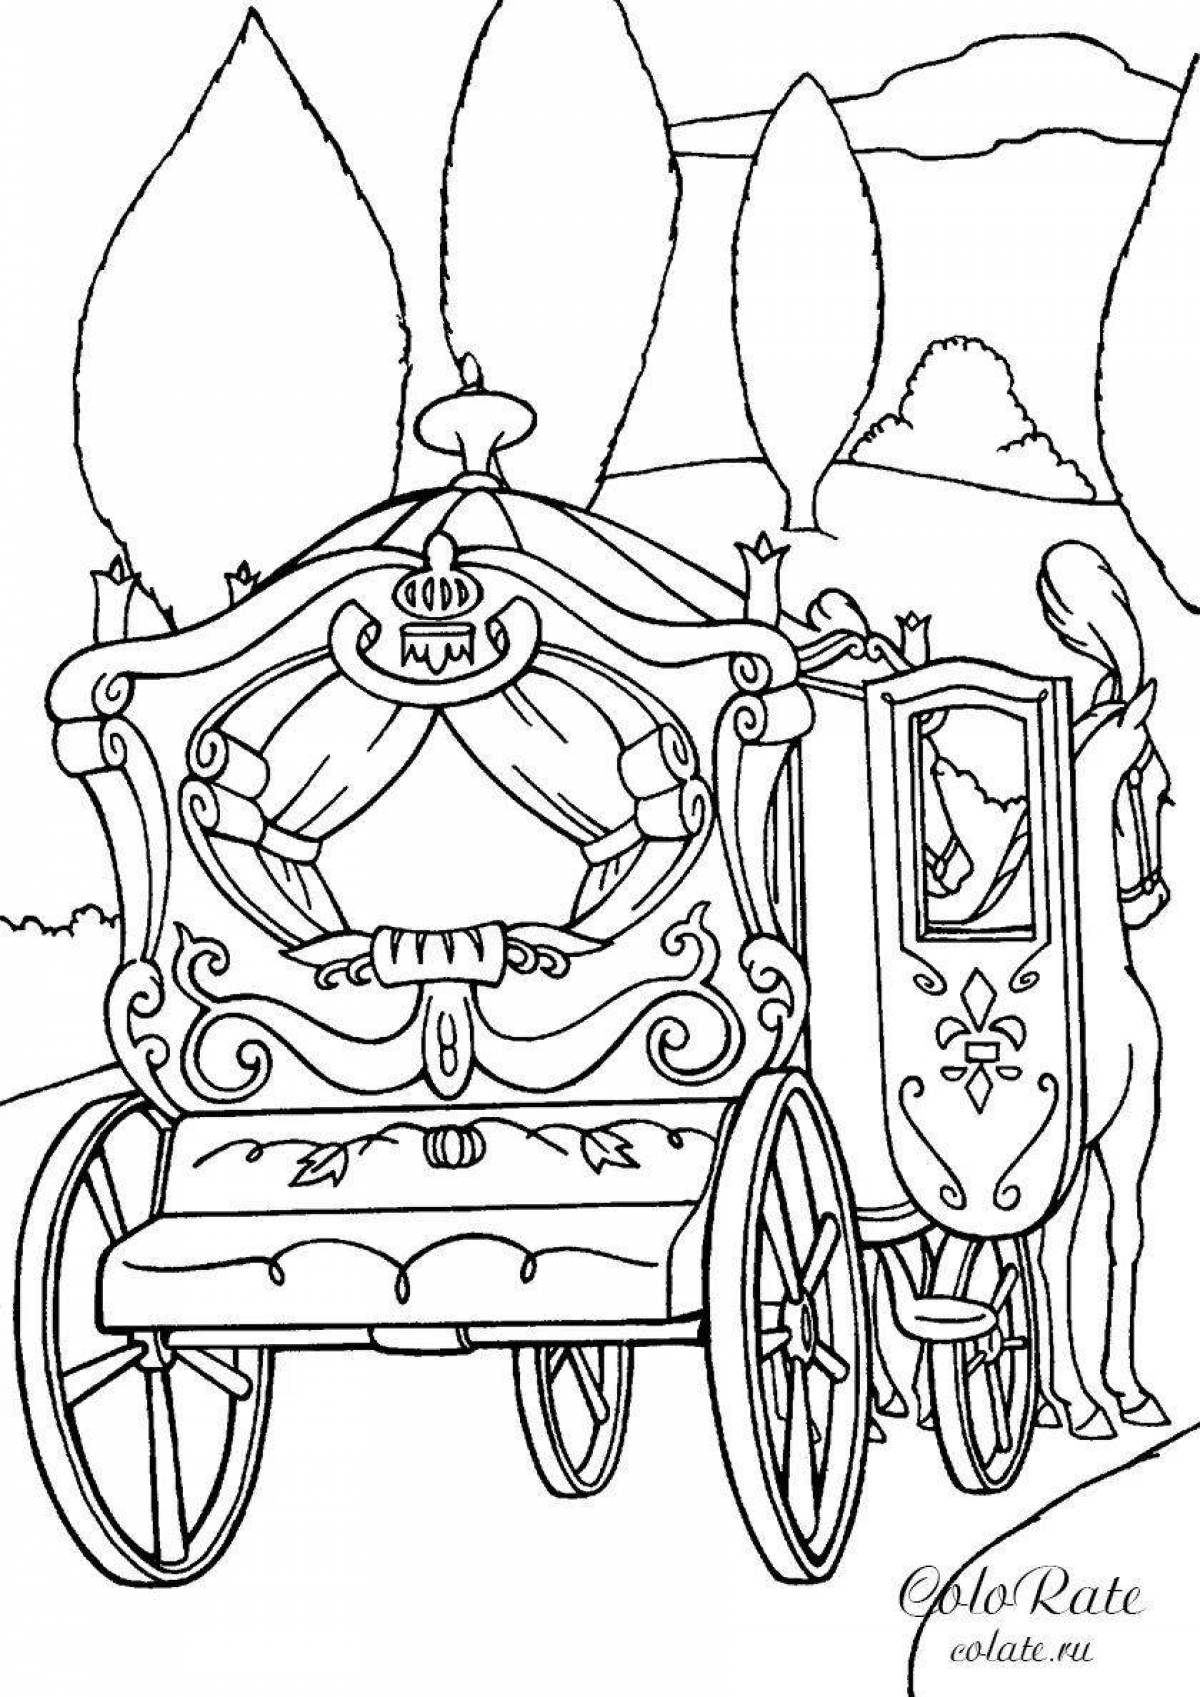 Colorful princess in carriage coloring book